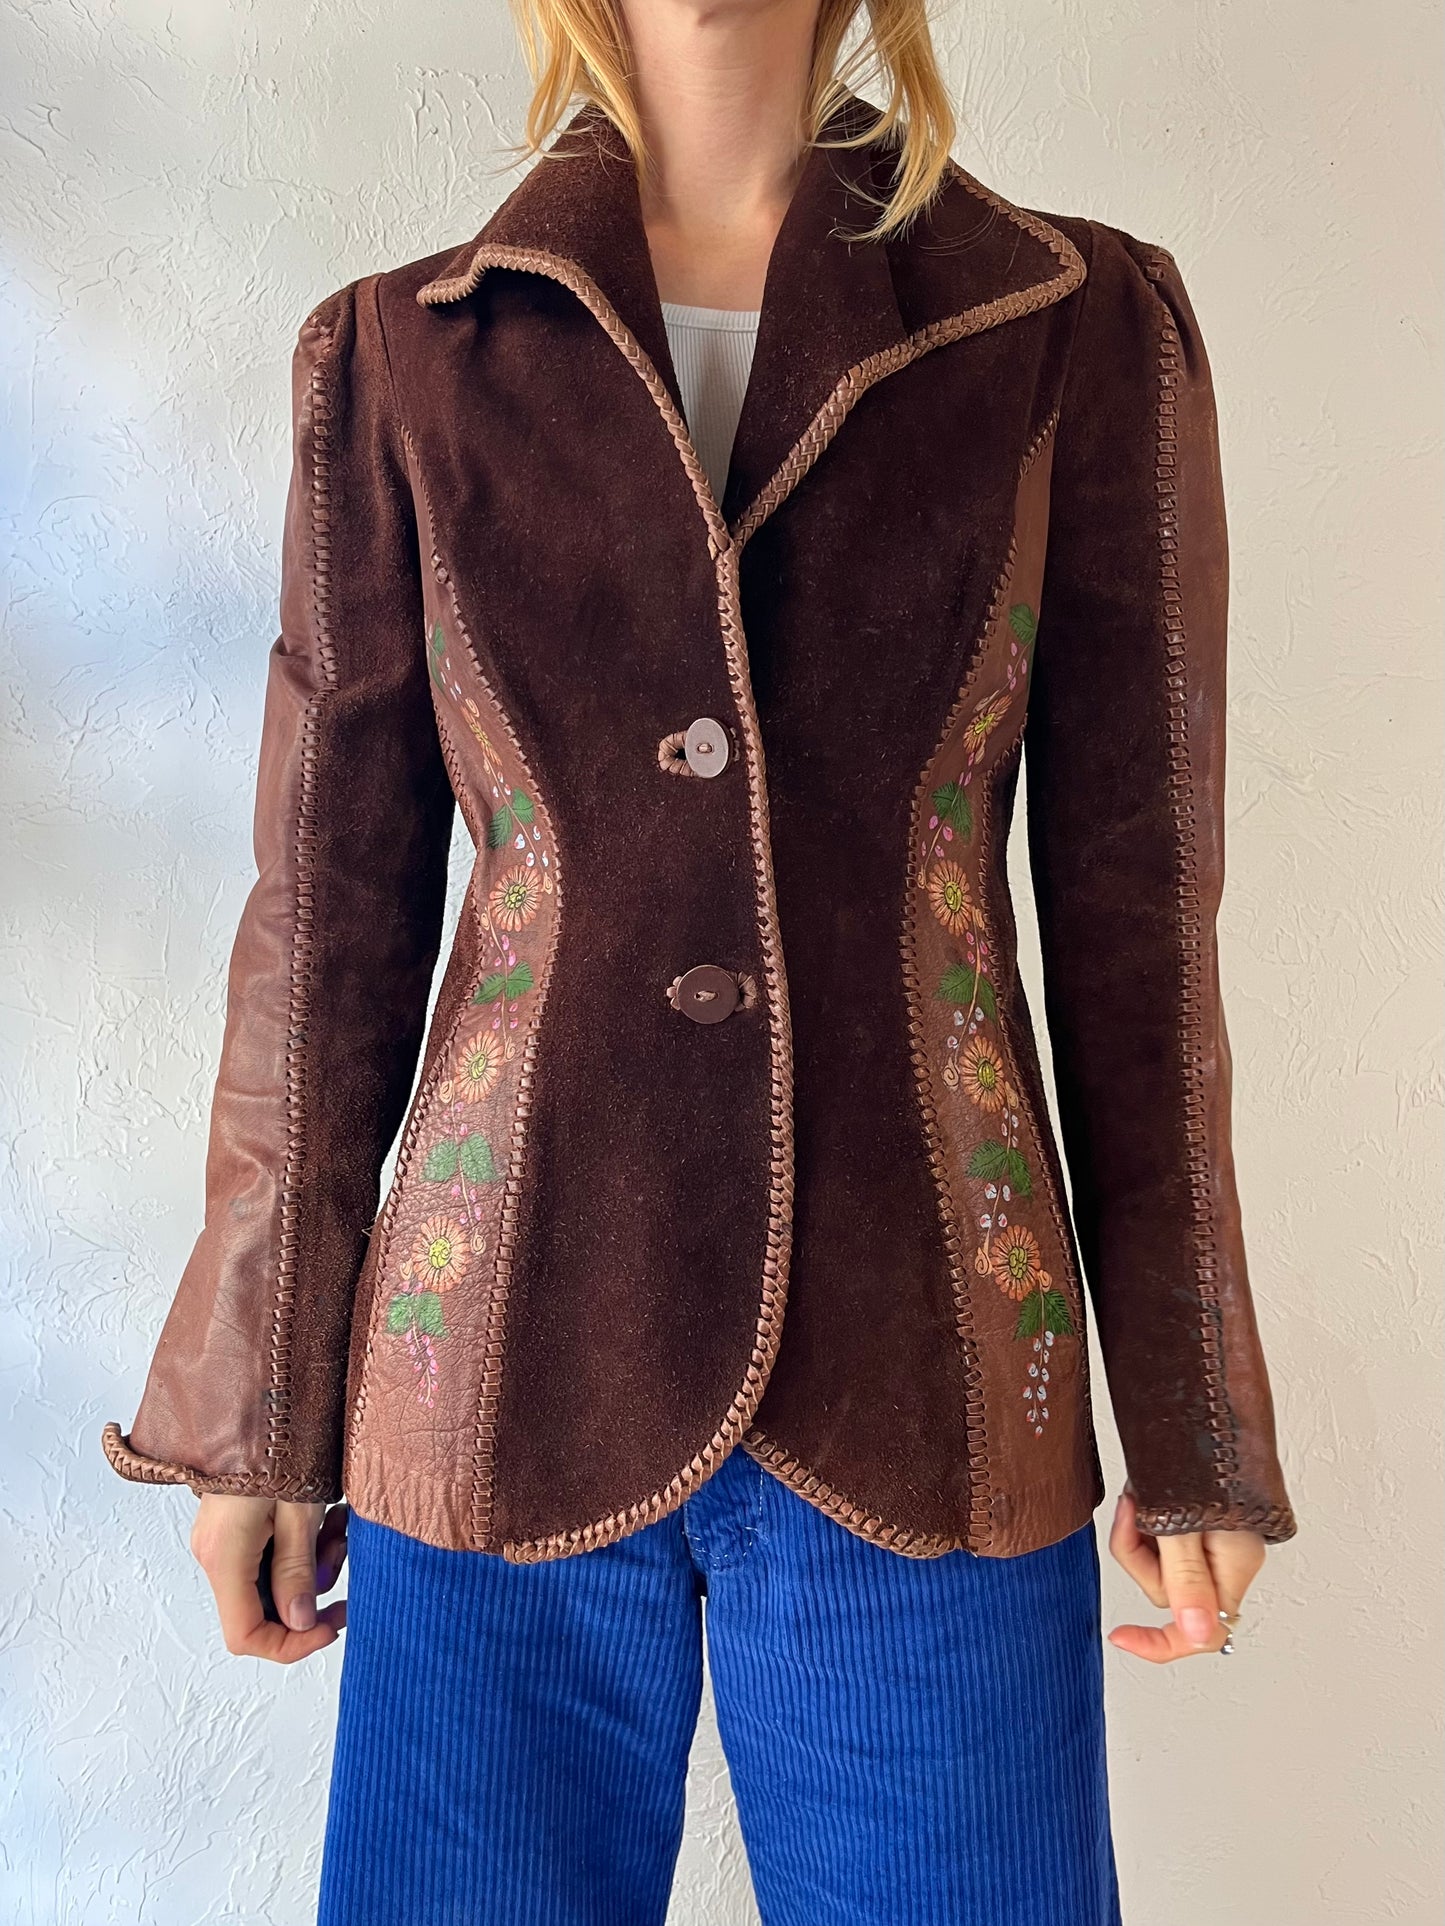 Vintage Hand Painted Brown Suede Leather Jacket / Small